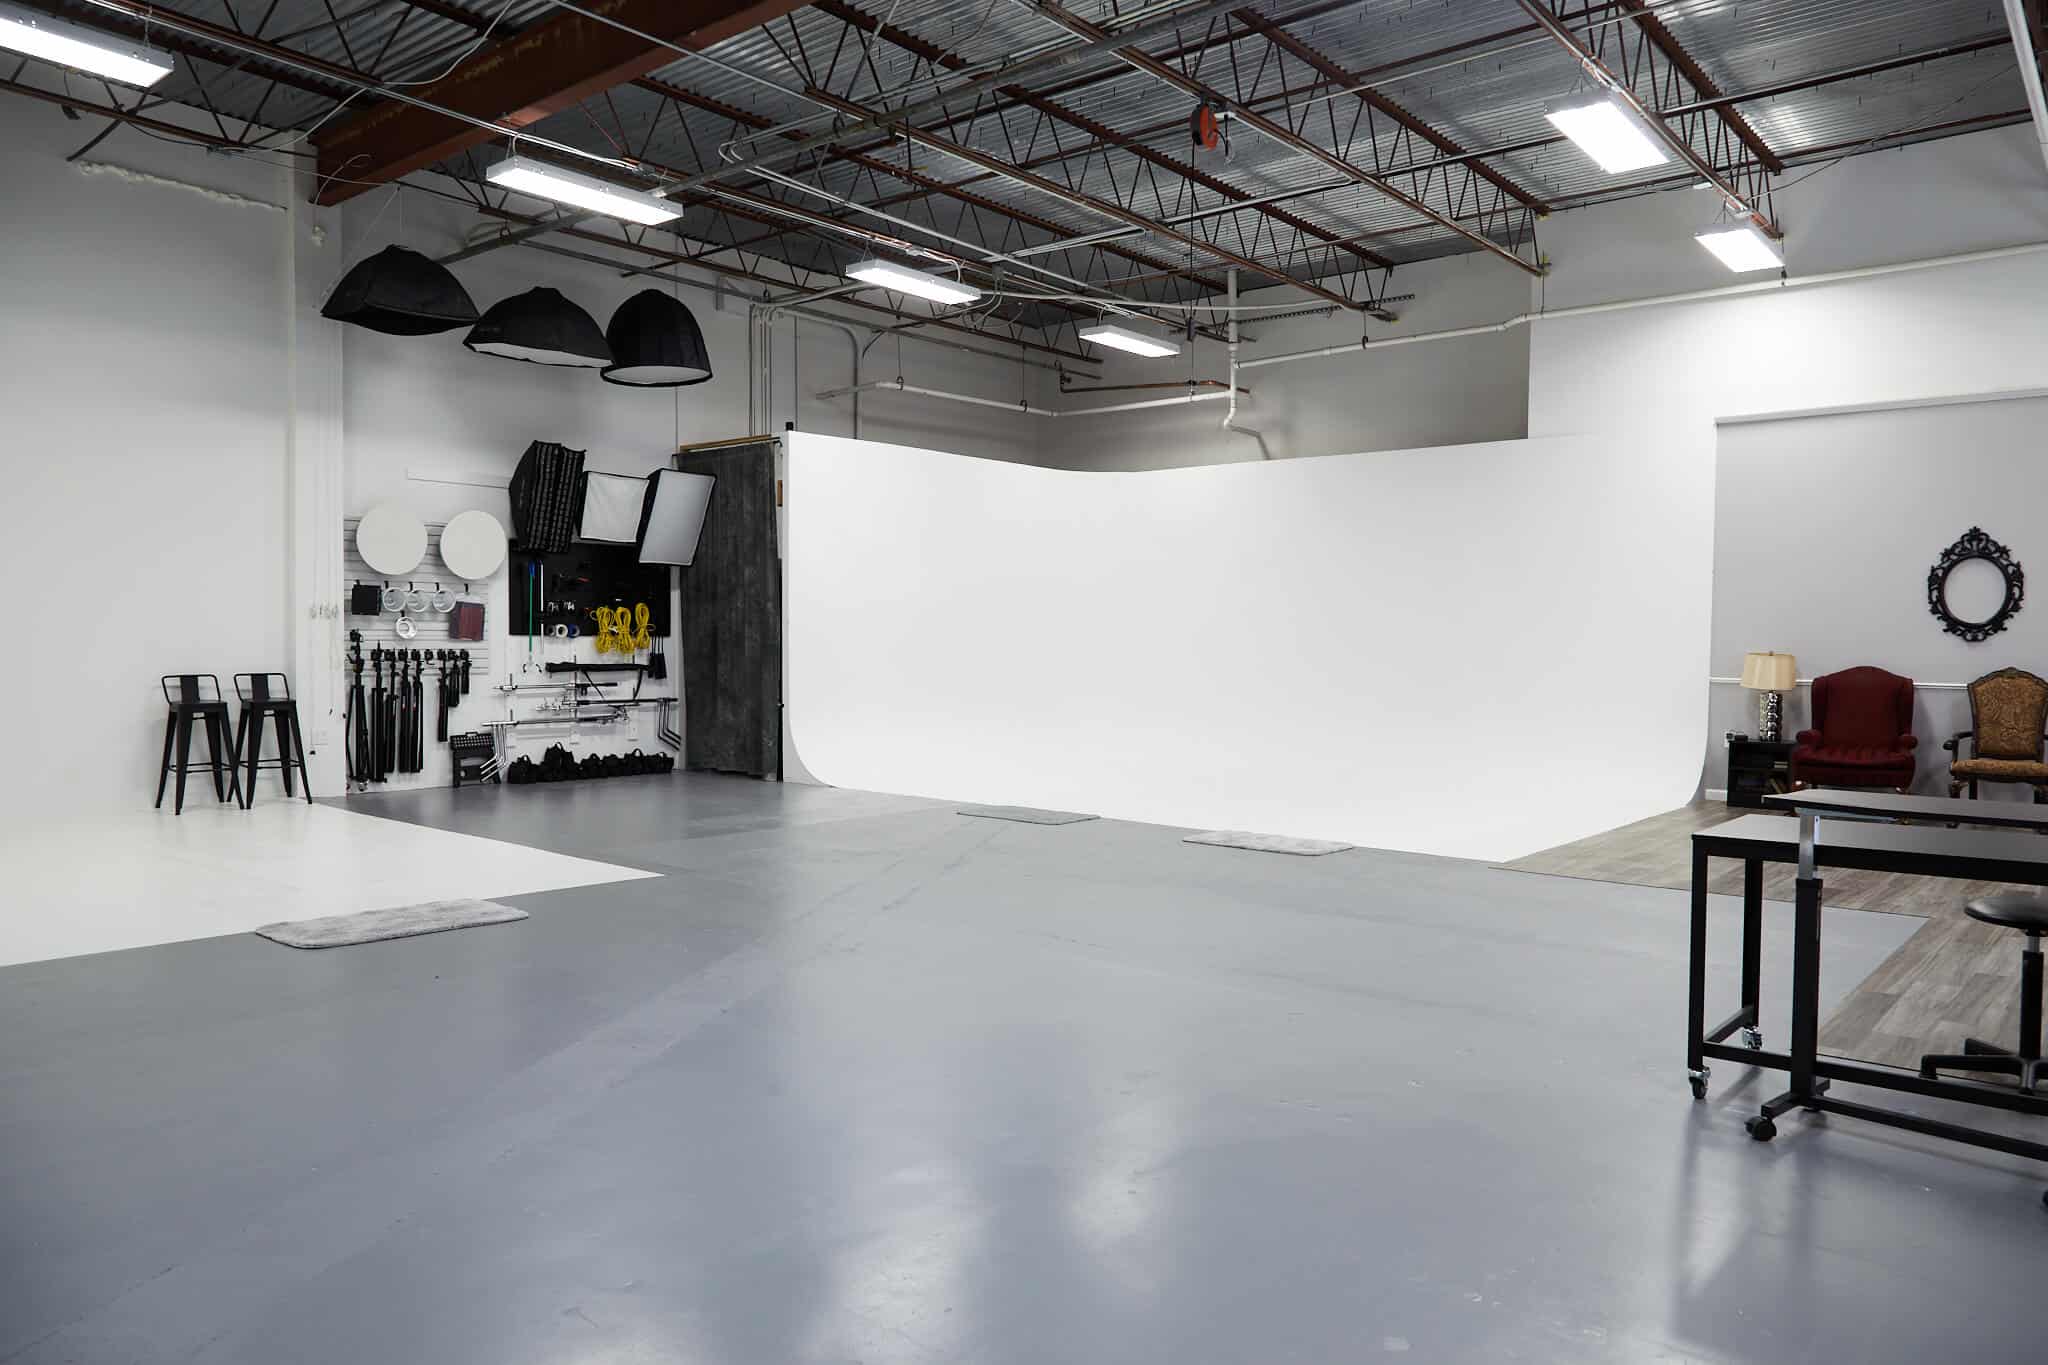 How much does it cost to rent a photo shoot venue